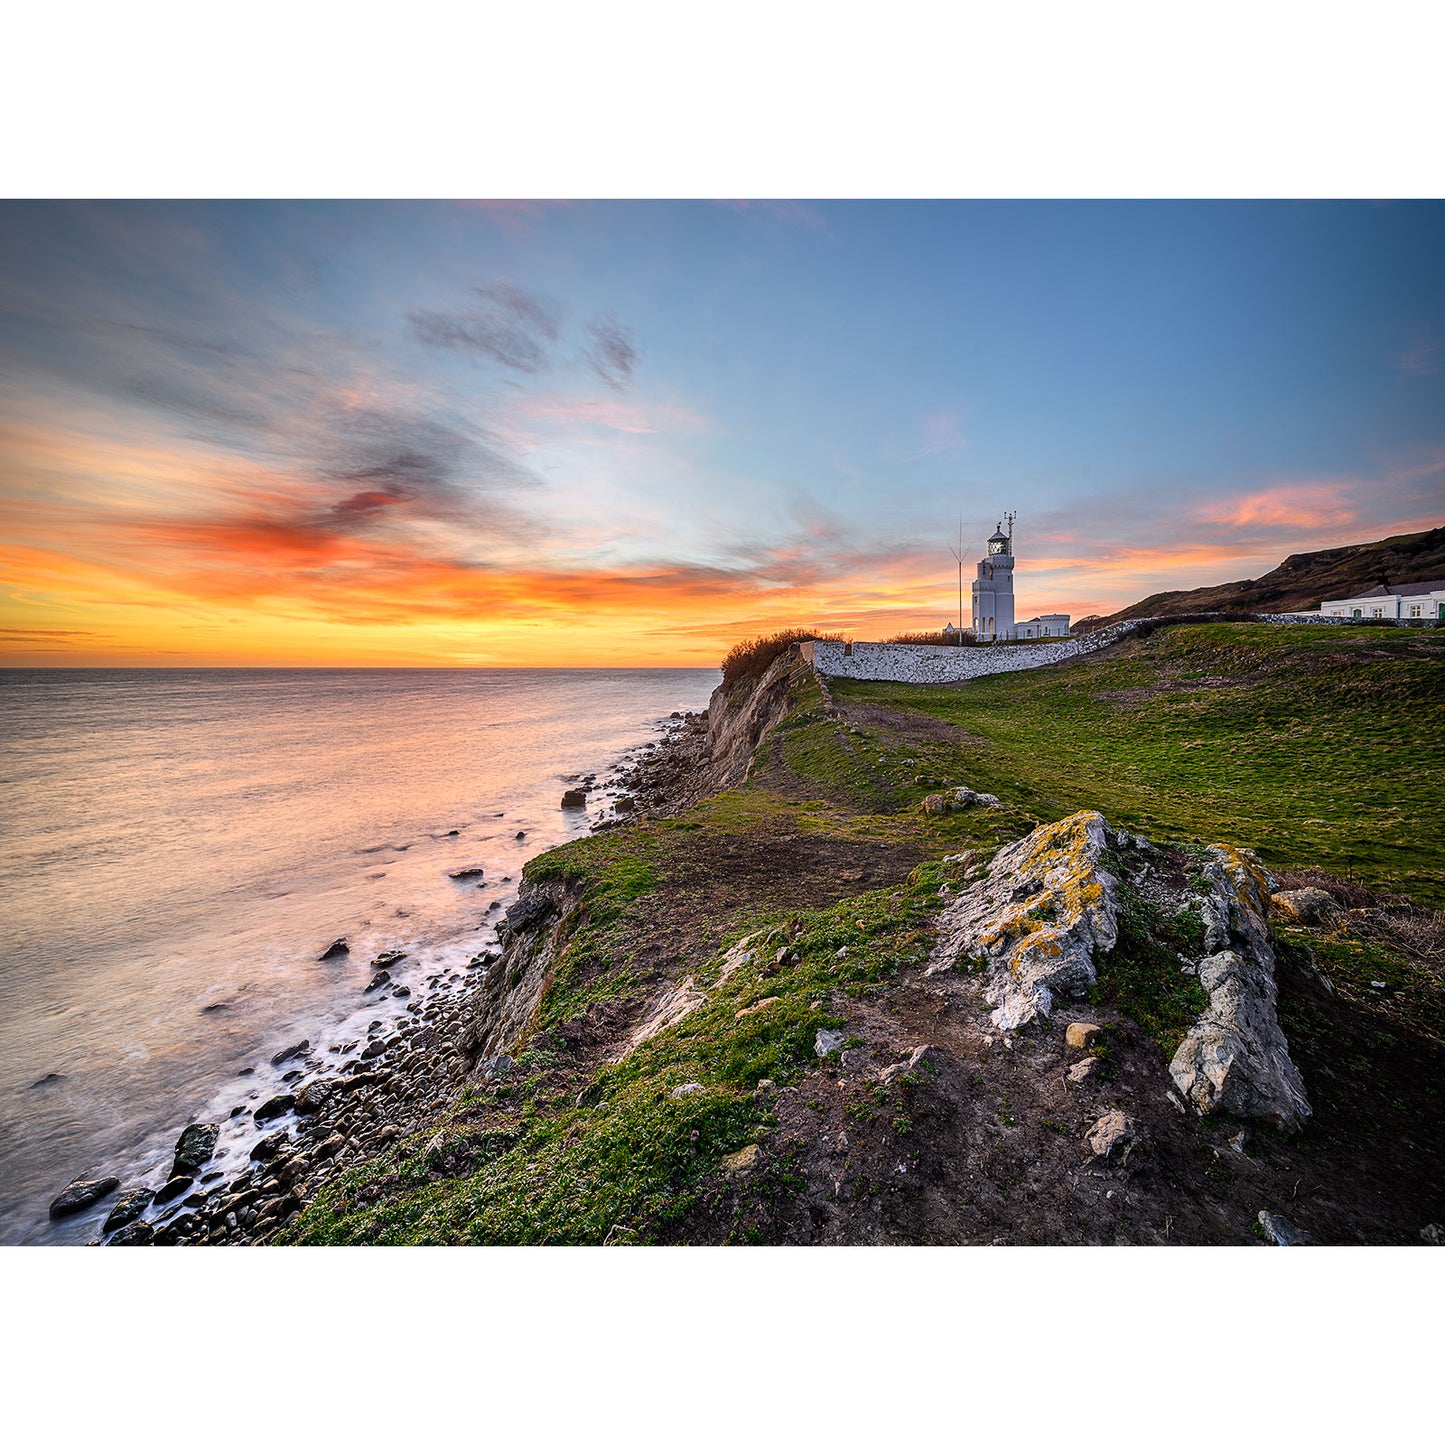 Spectacular St. Catherine's Lighthouse on a coastal cliff at sunset by Available Light Photography.